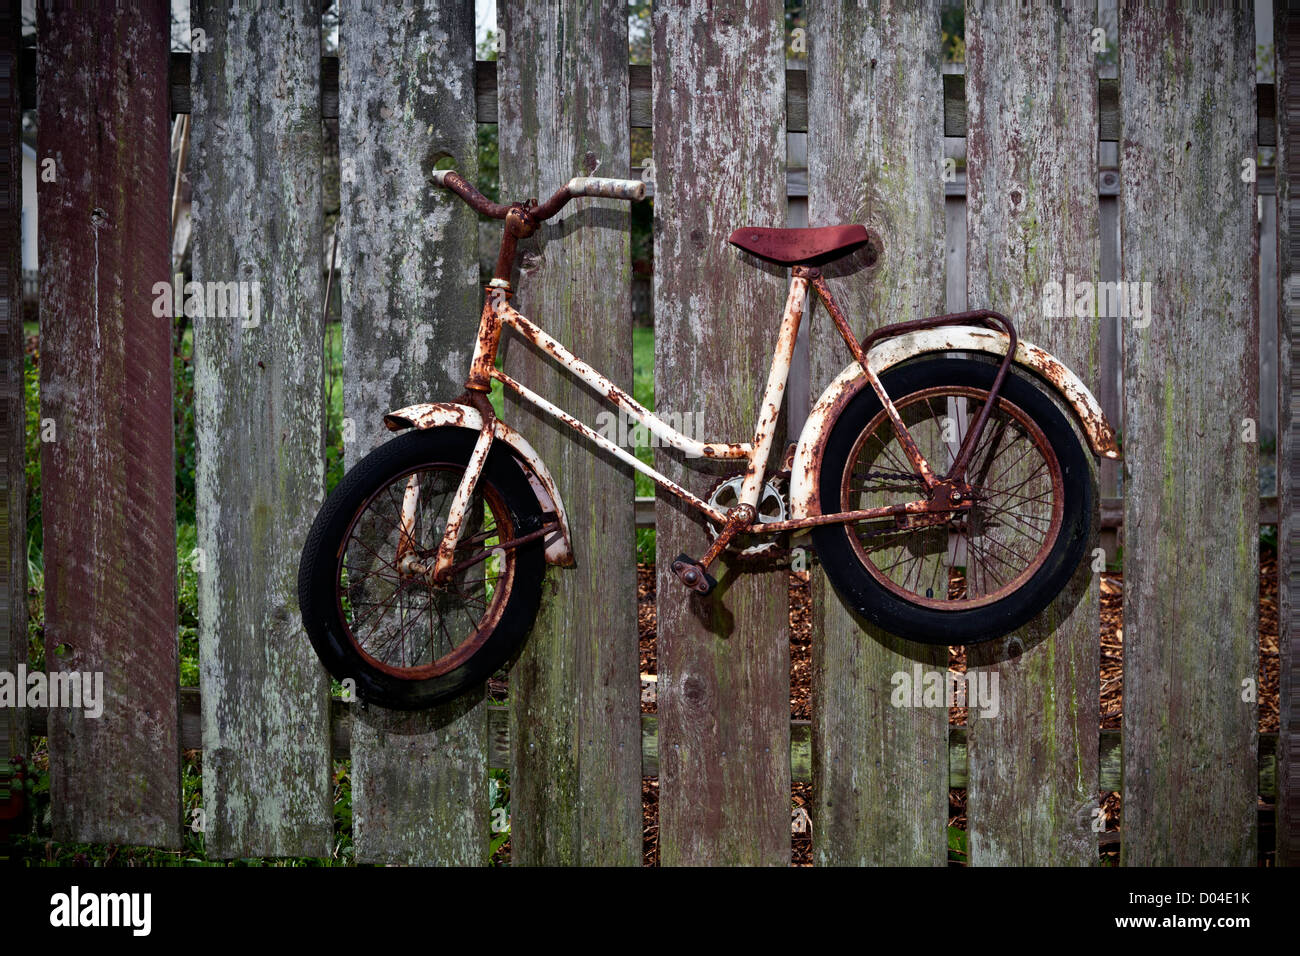 WA06520-00...WASHINGTON - Bicycle on a fence in the town of Eastsound on Orcas Island. Stock Photo